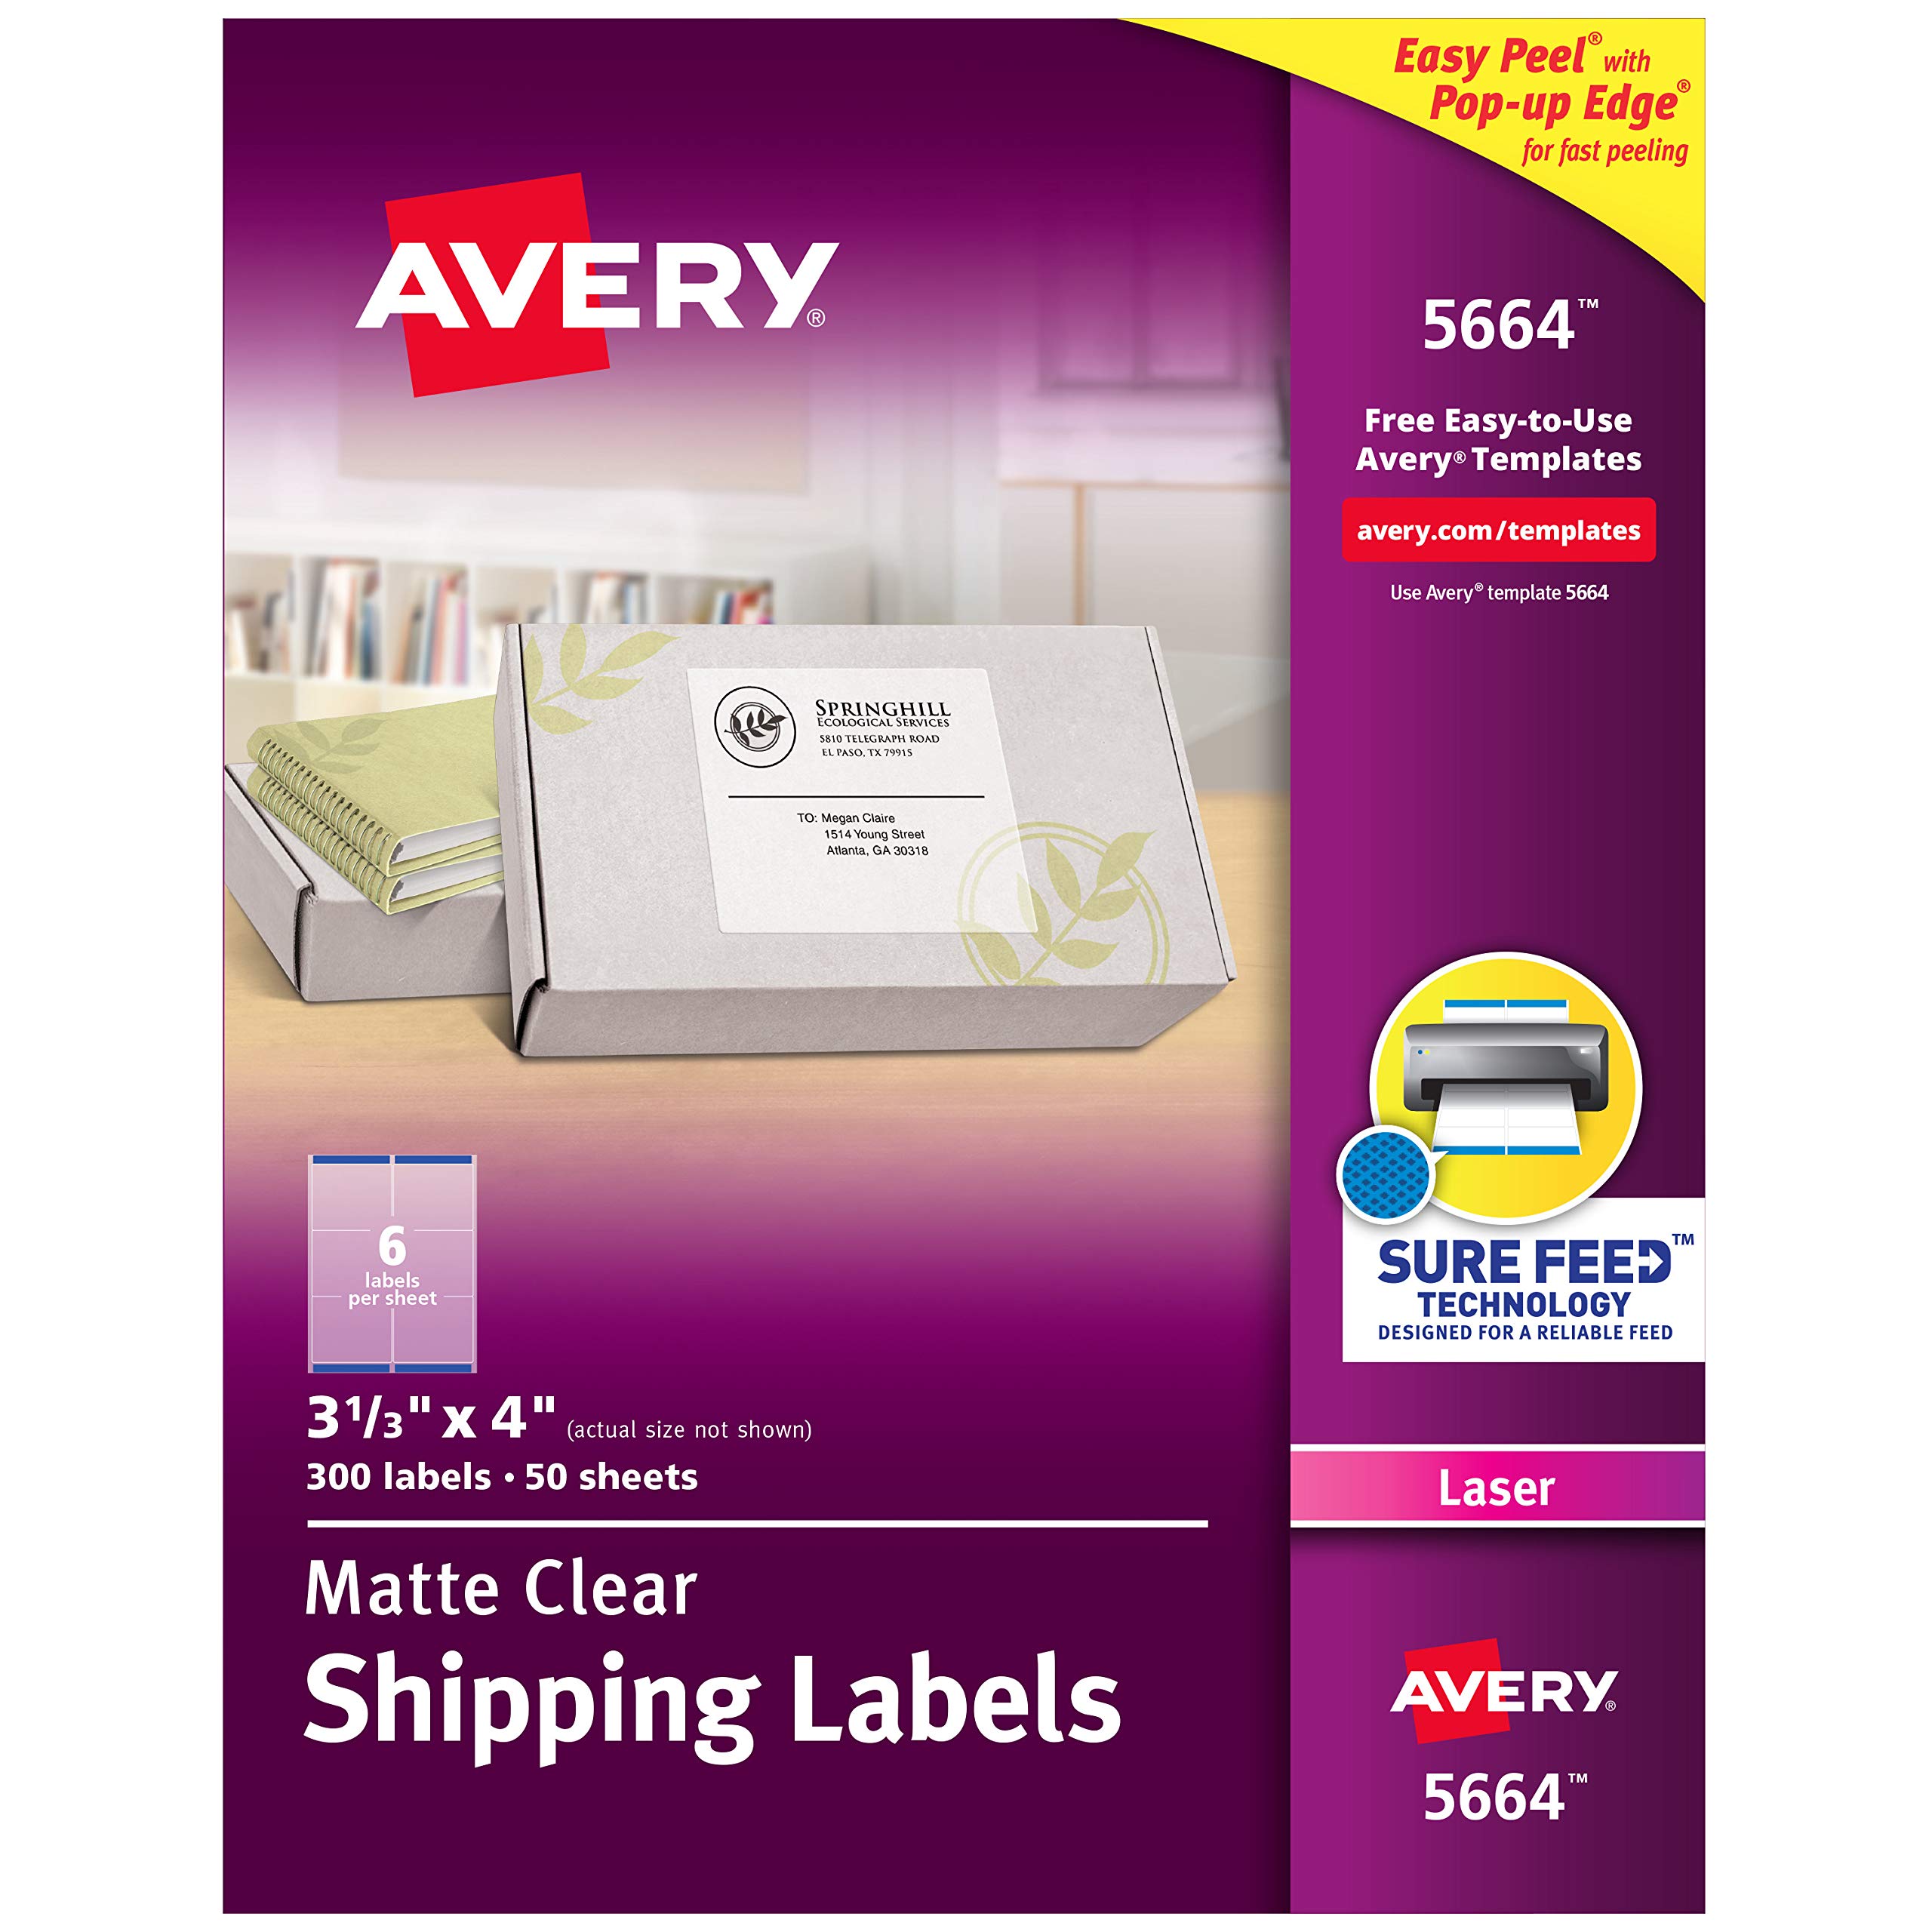 Avery Matte Frosted Clear Address Labels for Laser Printers, 3-1/3" x 4", 300 Labels, 5 Packs (5664)